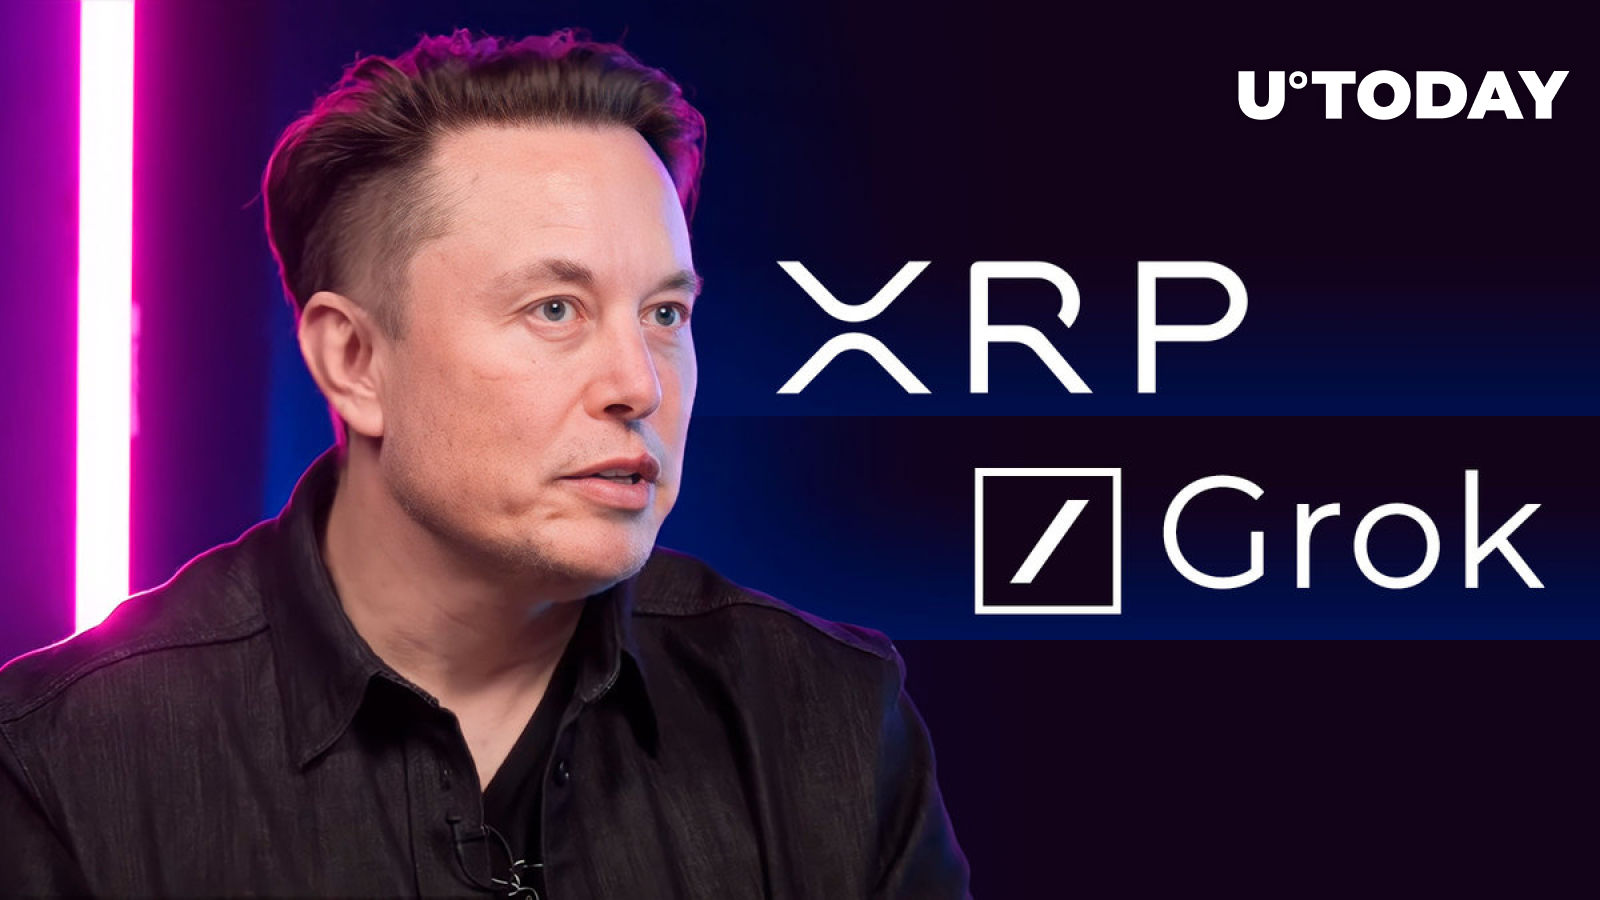 XRP Can Become Stablecoin, Elon Musk’s AI Grok Says